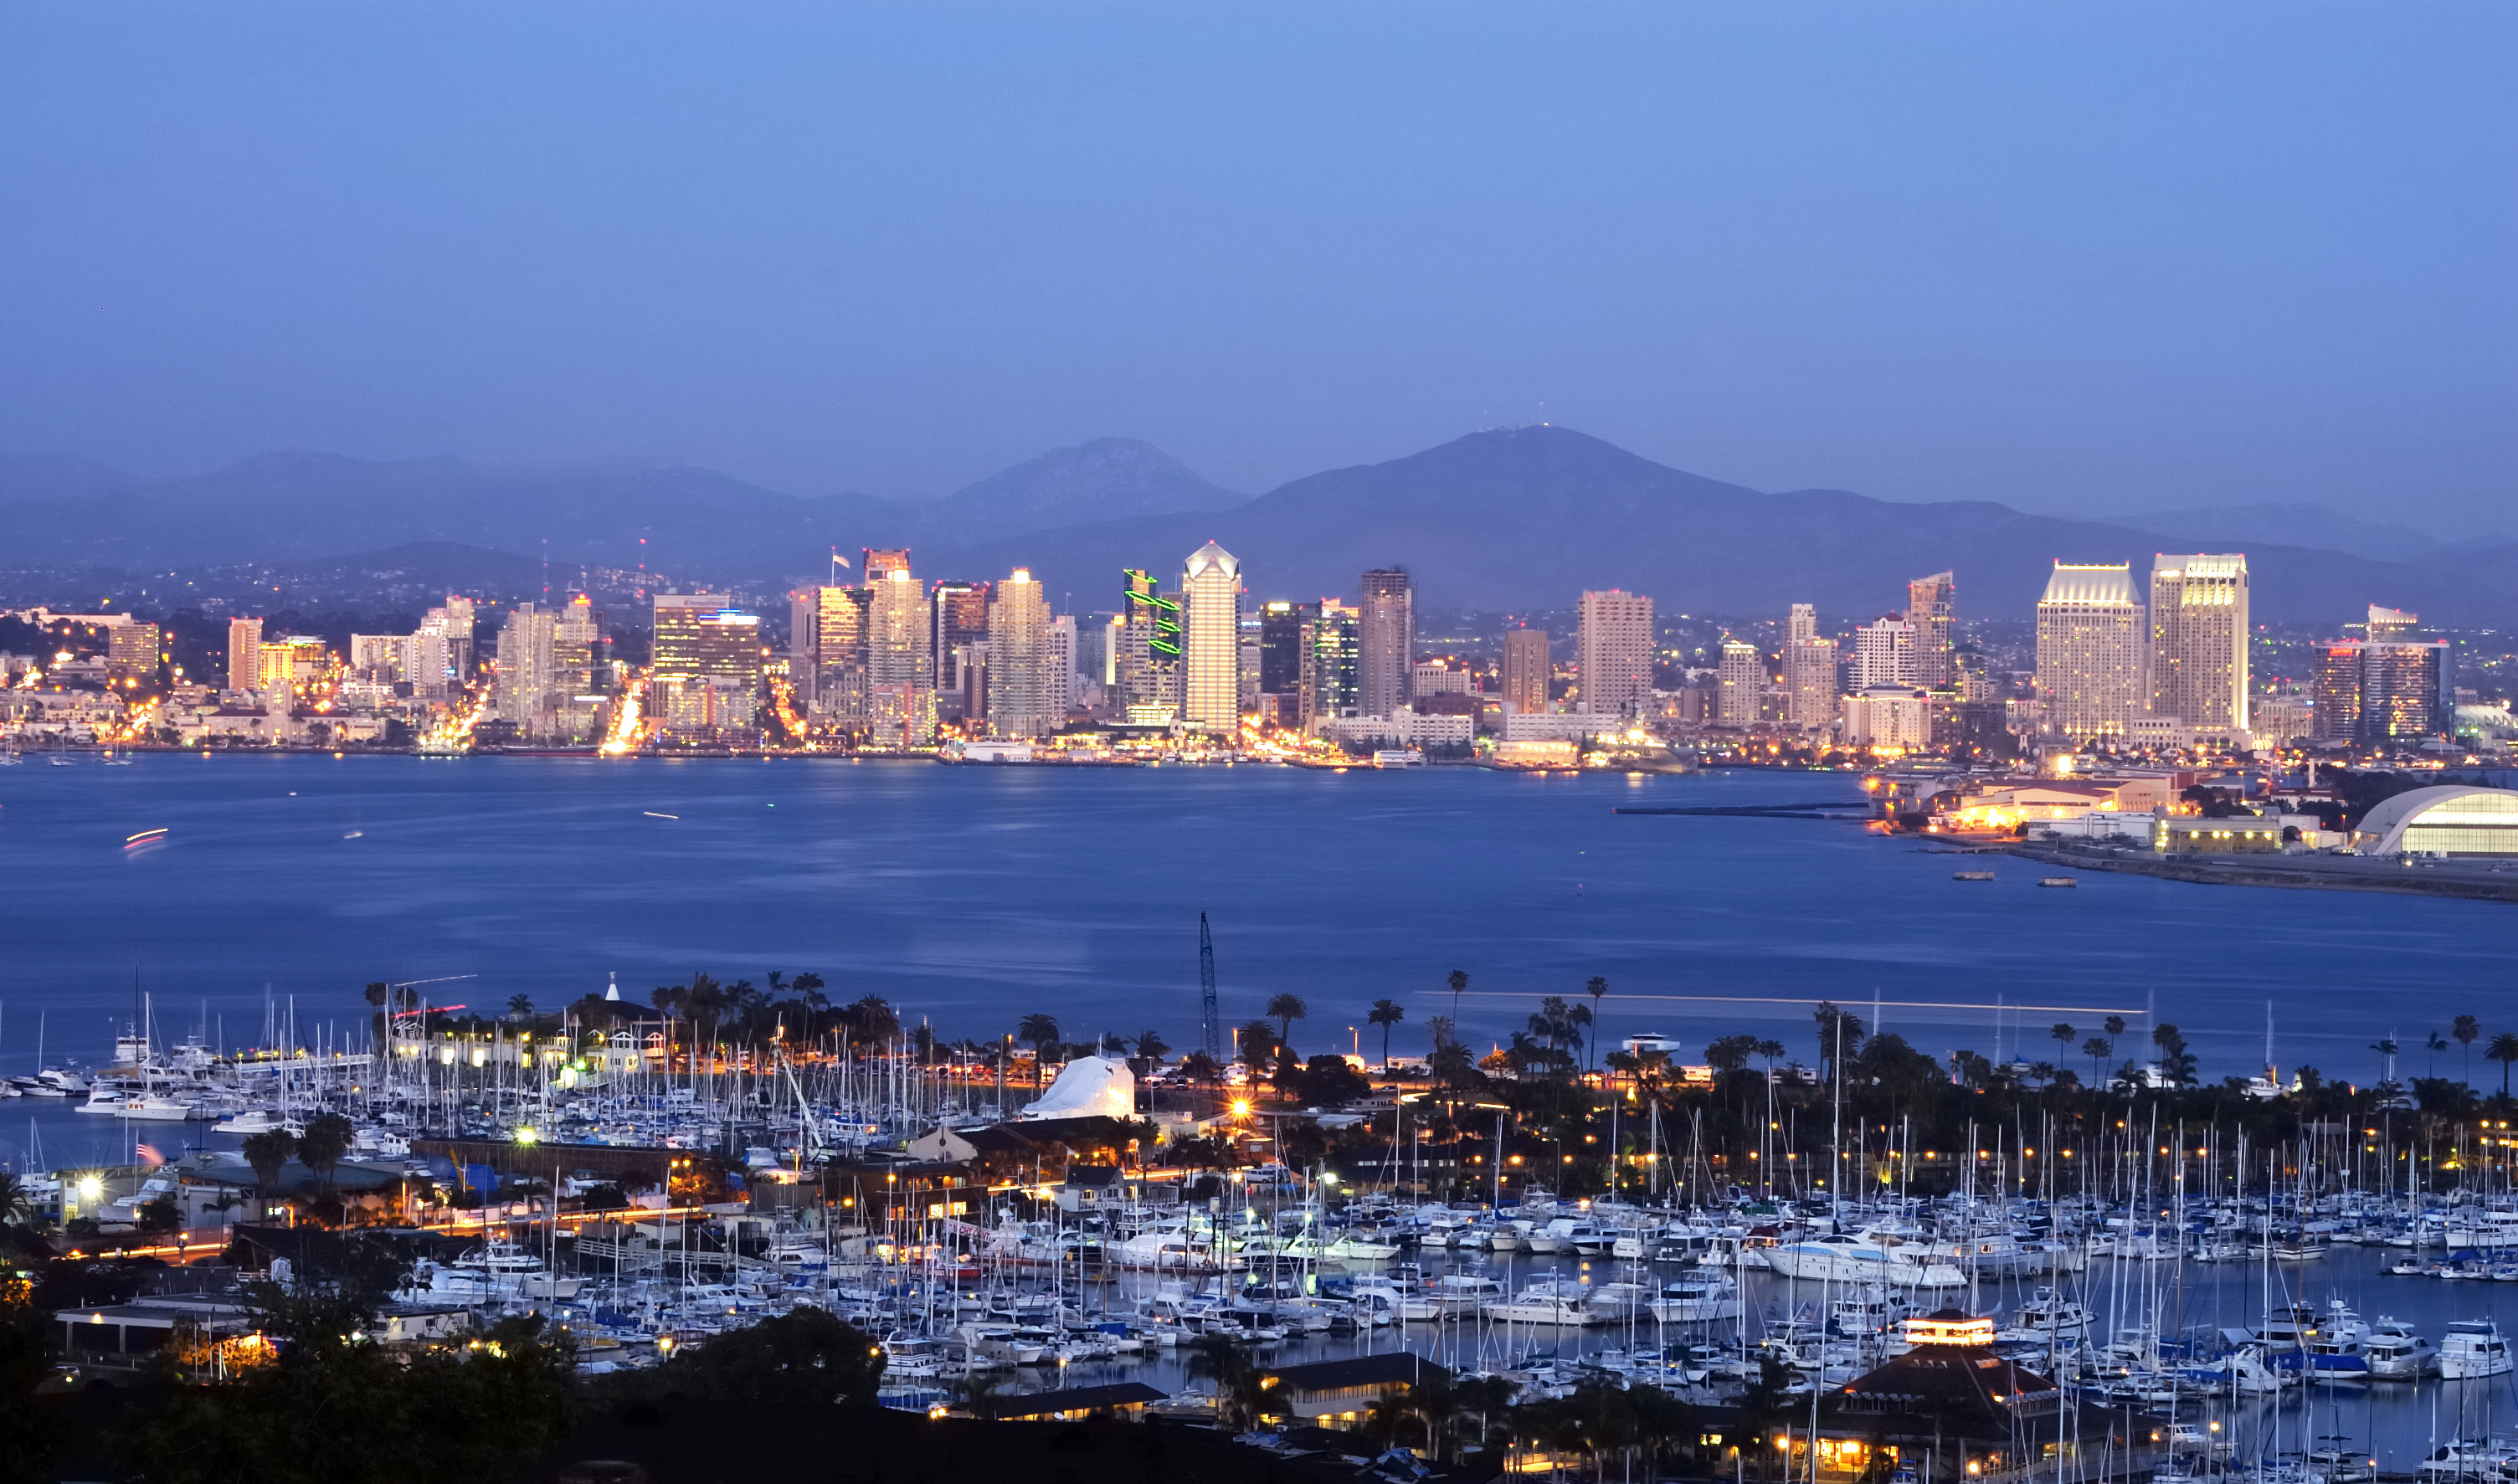 San Diego Named Top Destination for Spring Break by USA Today SDTA